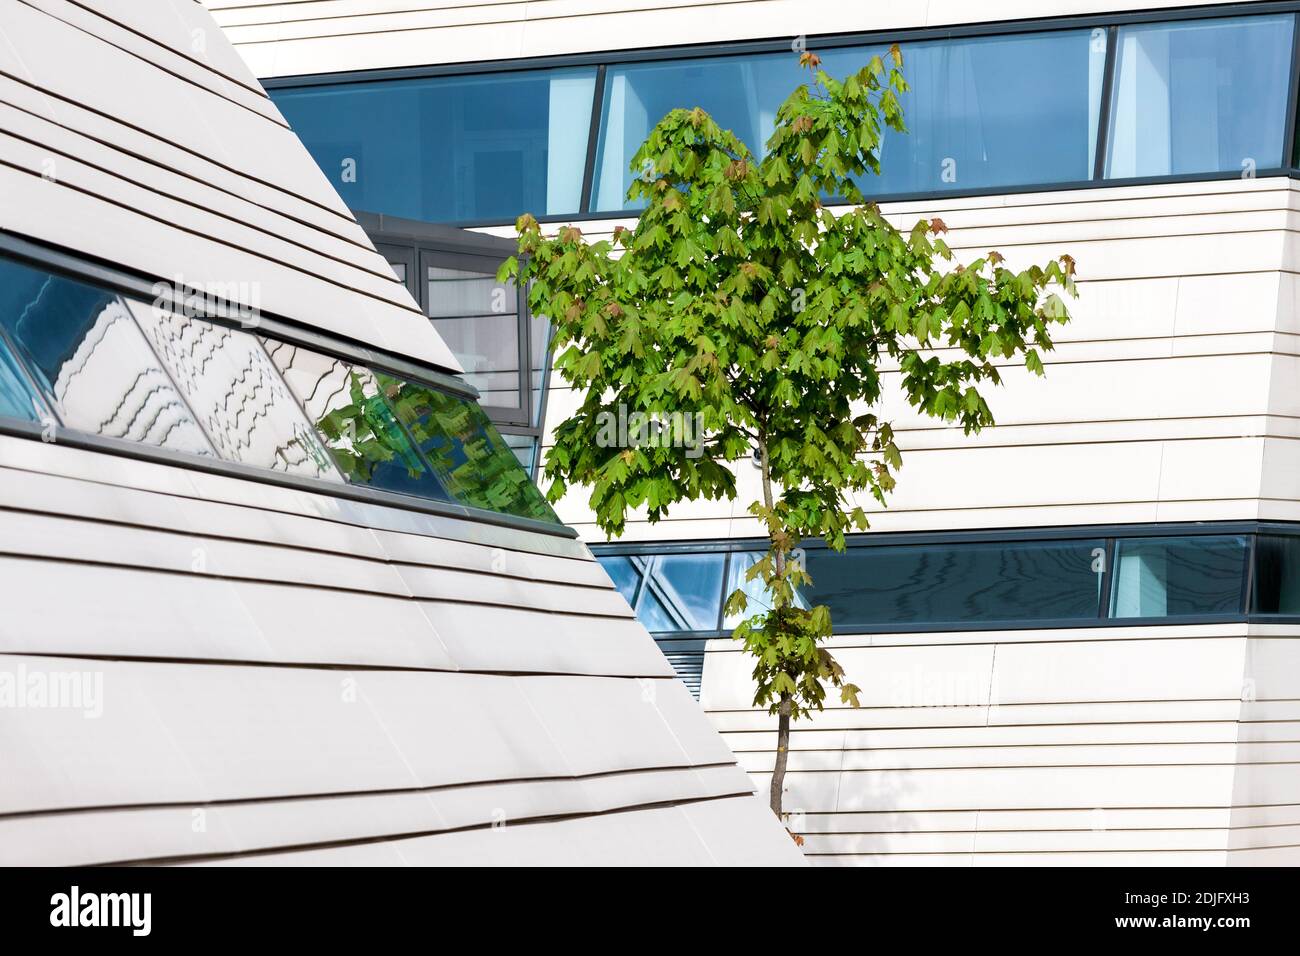 Young green maple tree in background of modern architecture building Stock Photo